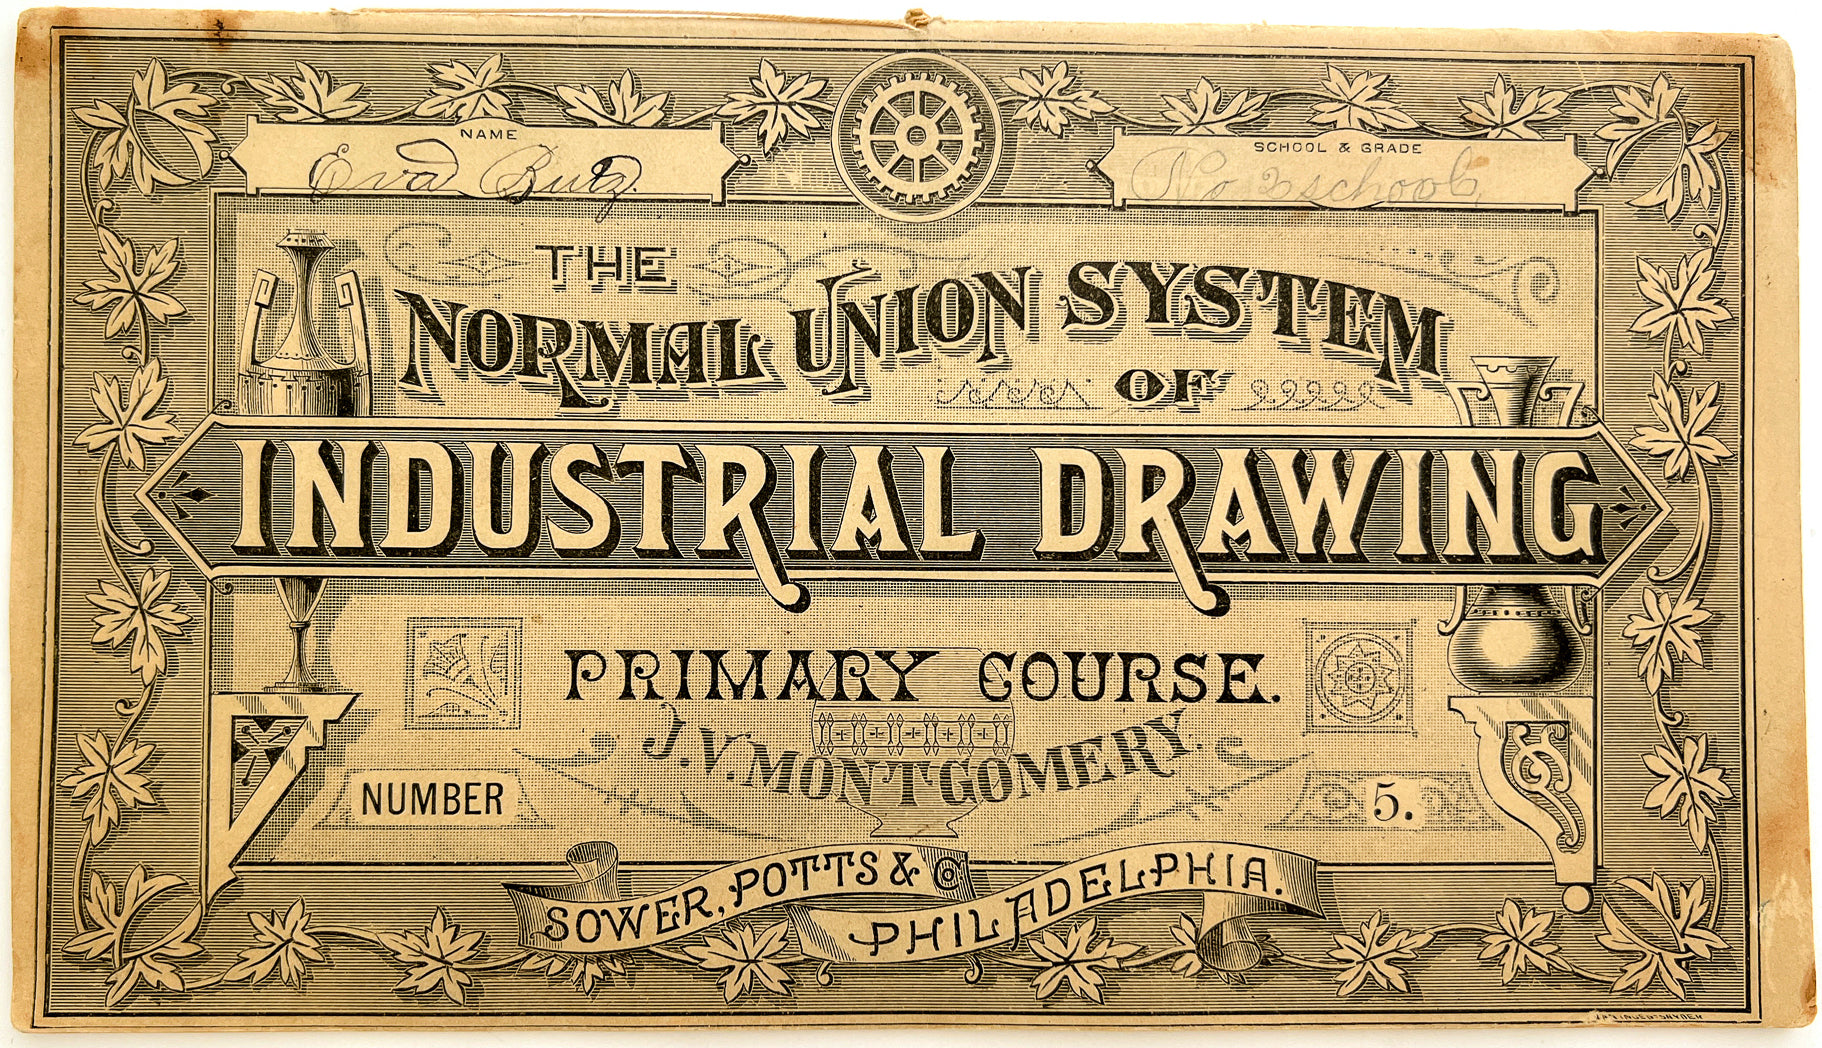 The Normal Union System of Industrial Drawing, Primary Course Number 5